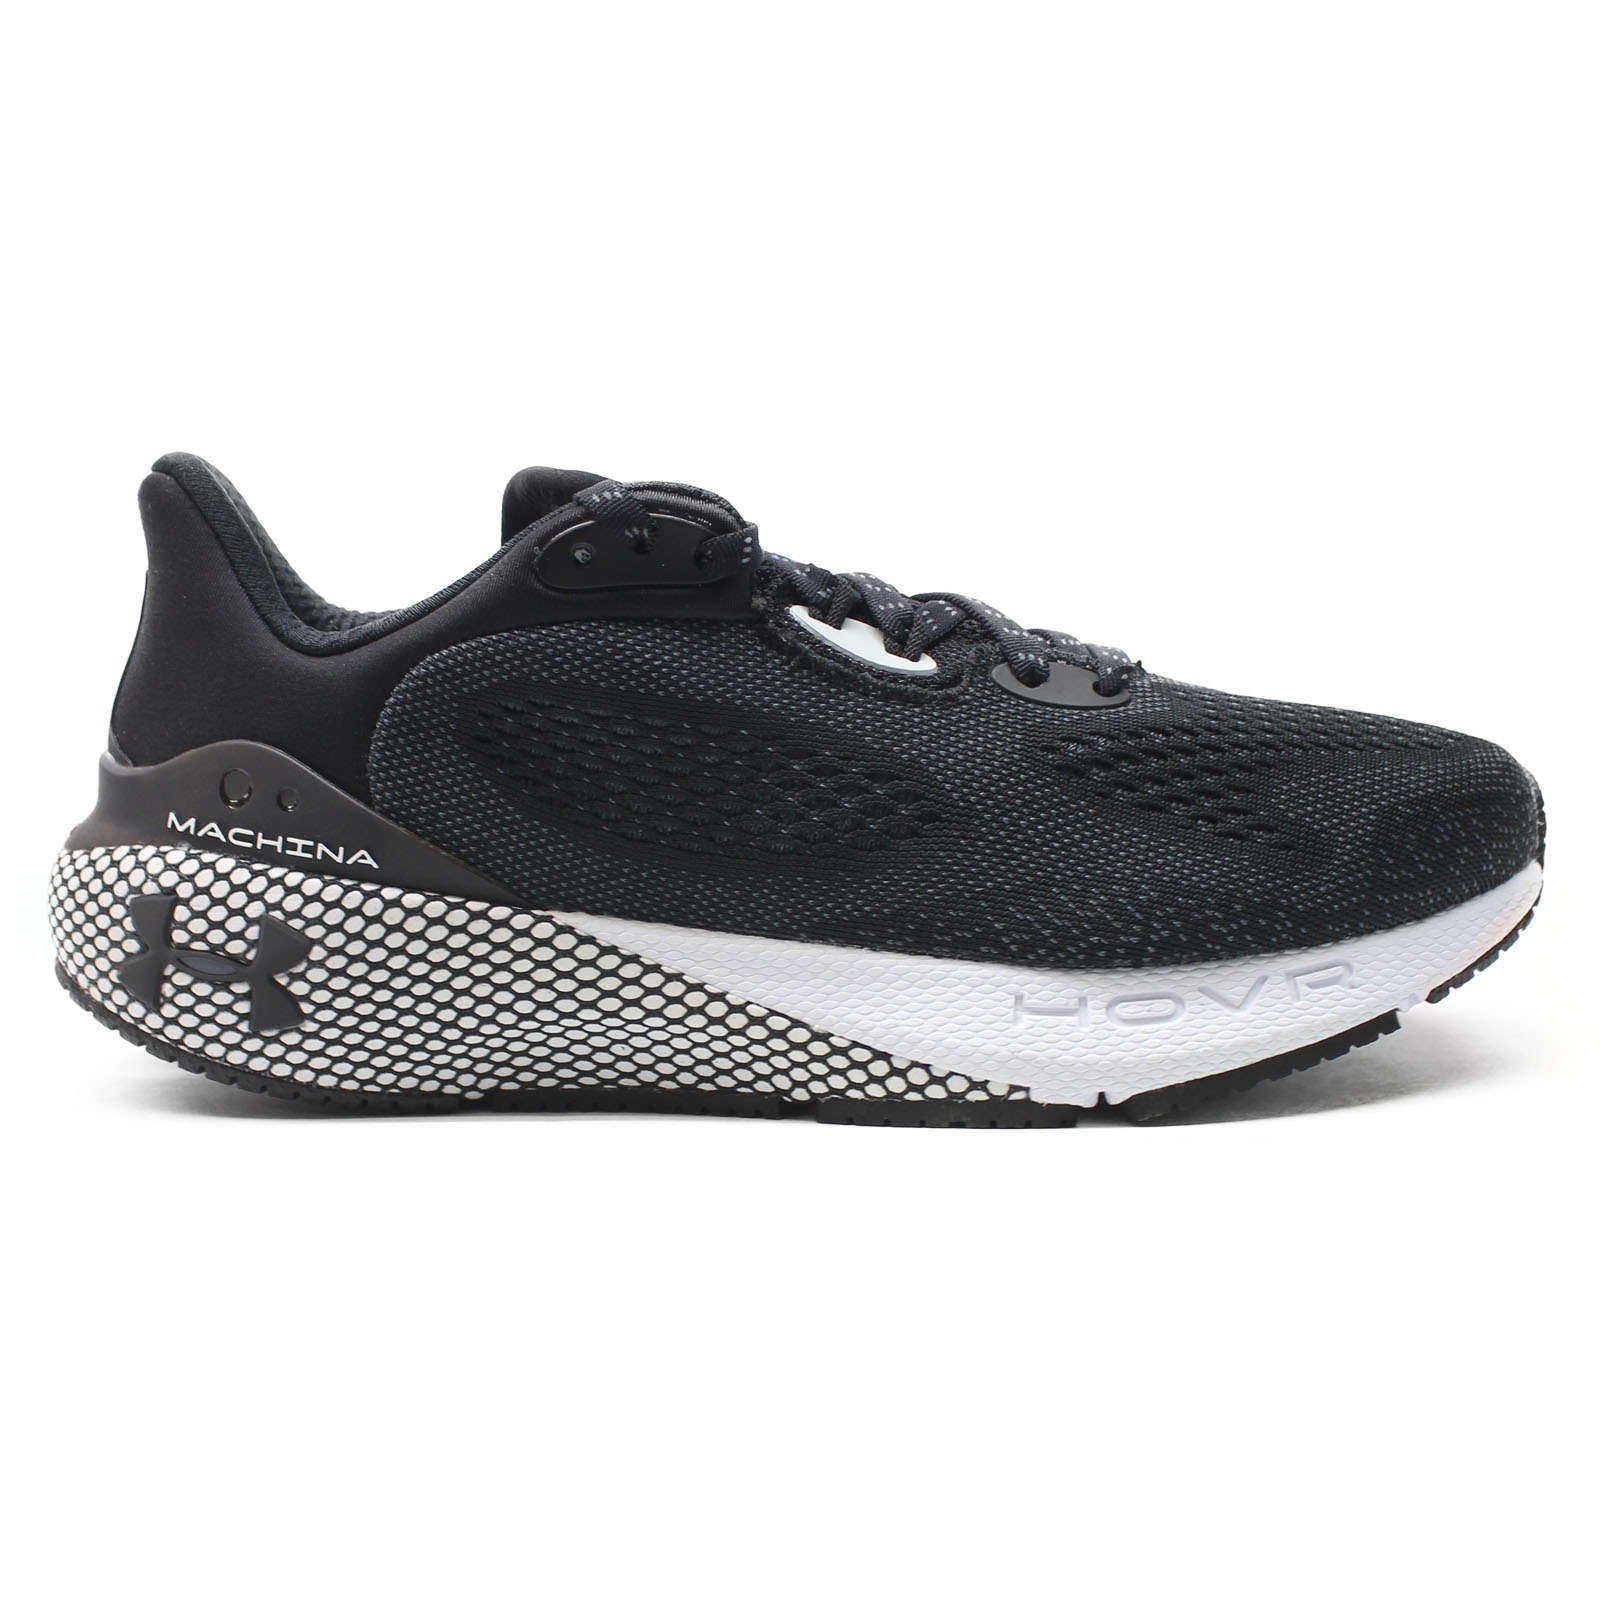 Under Armour HOVR Machina 3 Synthetic Textile Women's Low-Top Trainers